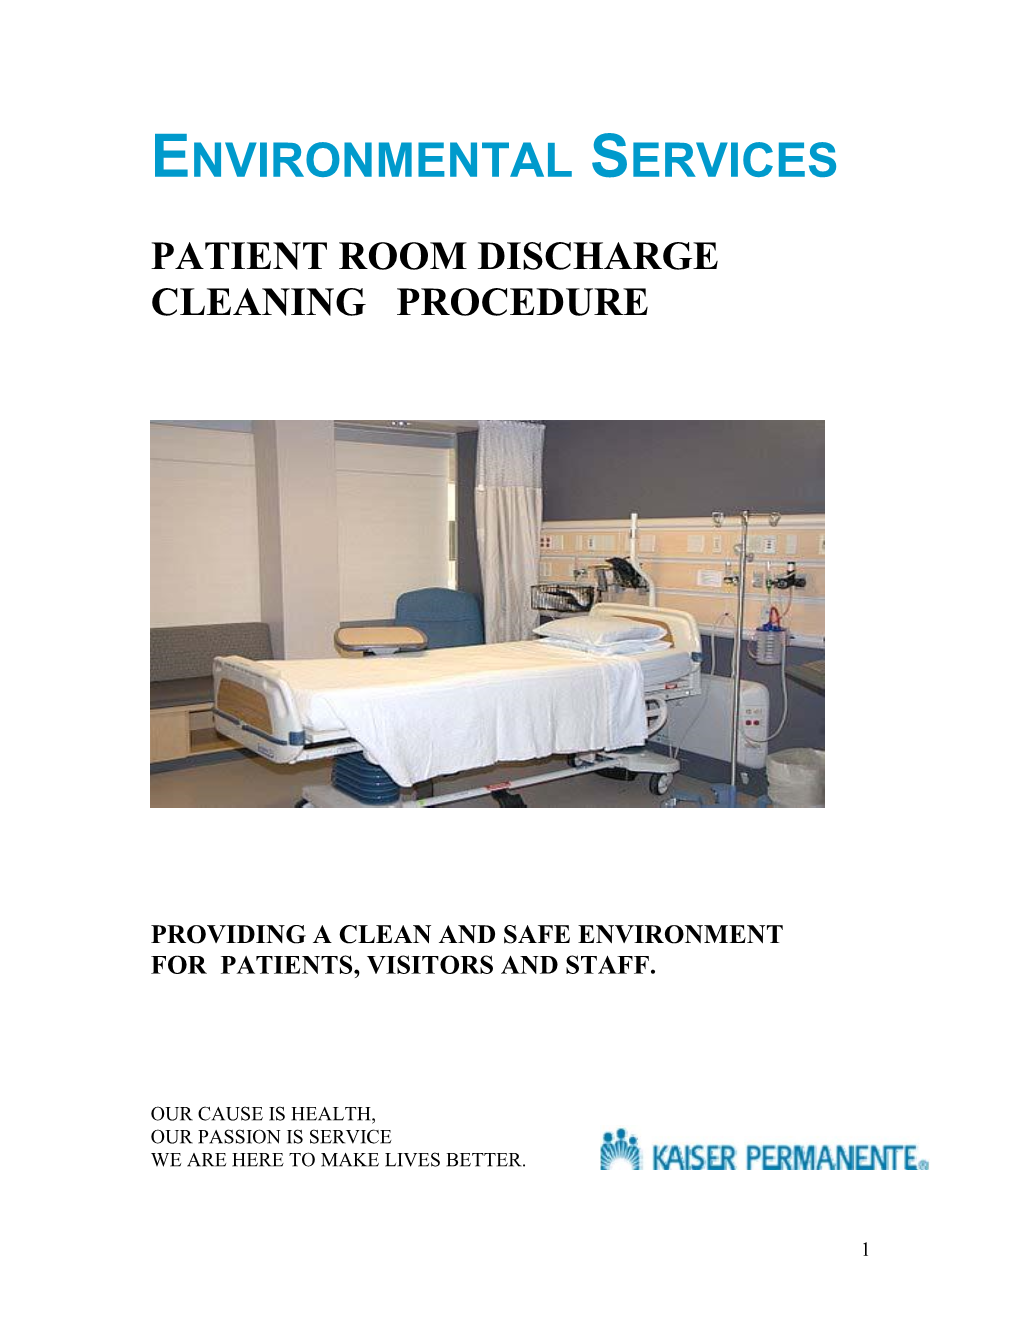 Environmental Services: Patient Room Discharge Cleaning Procedure